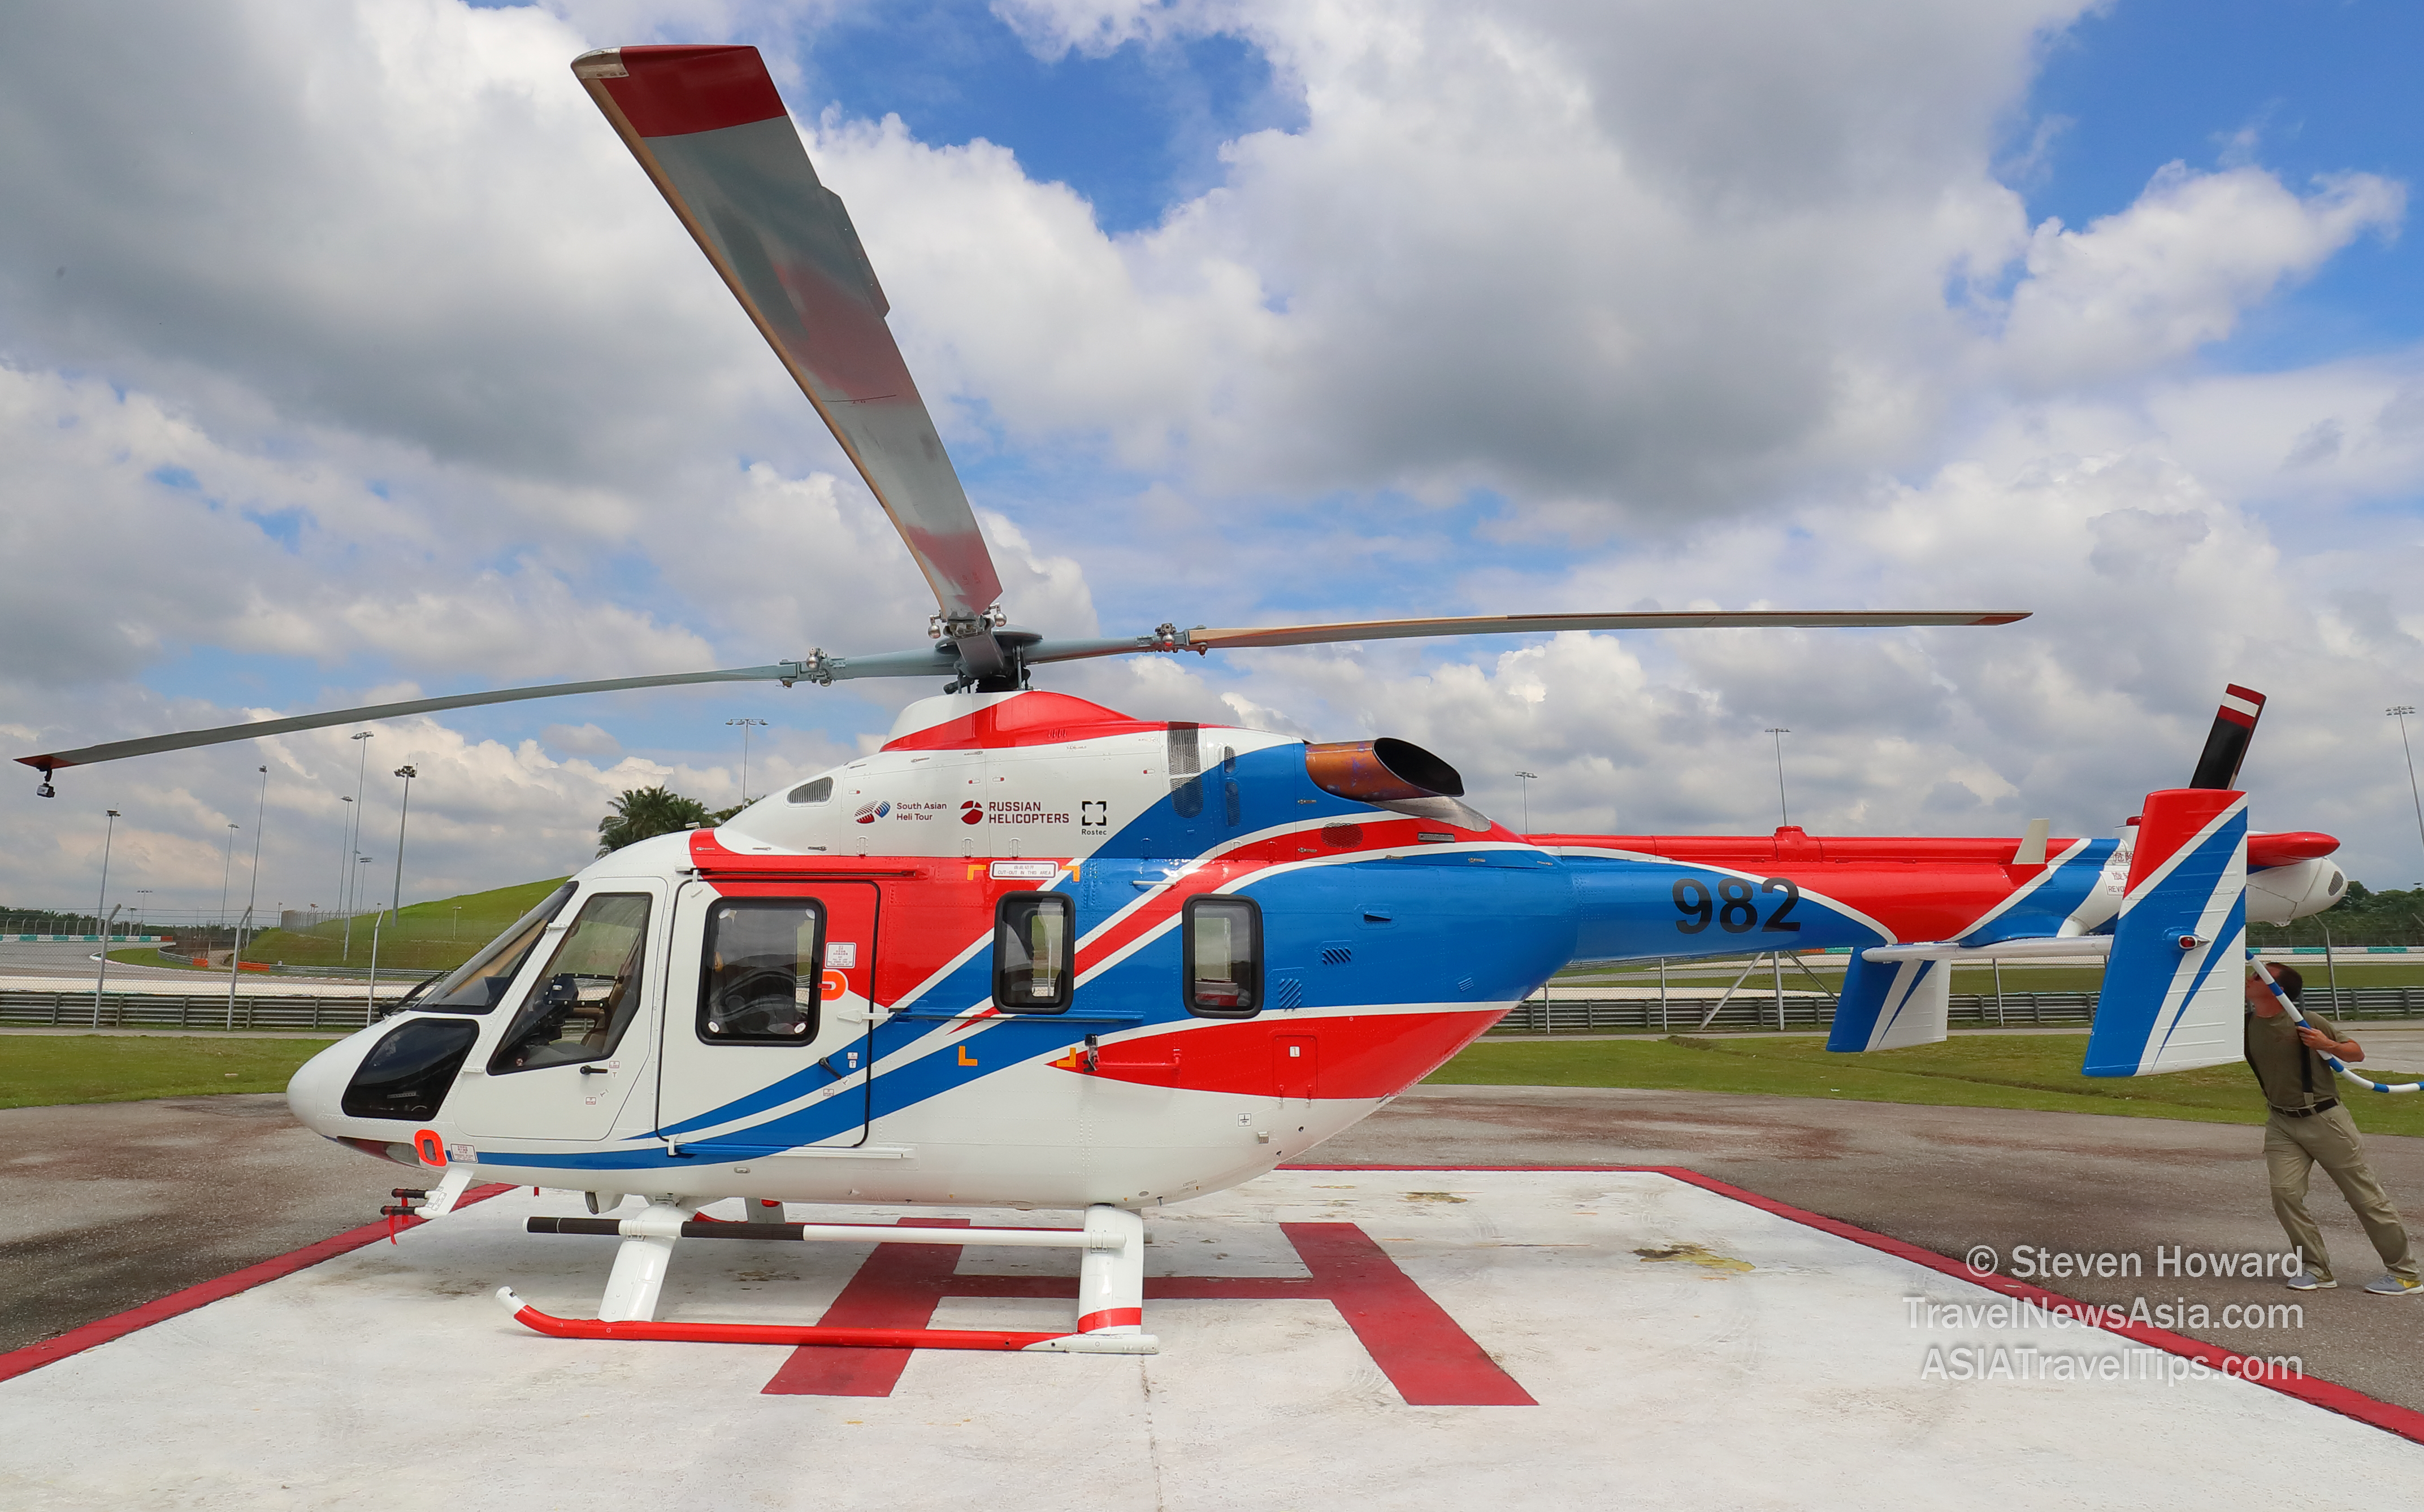 An Ansat Helicopter by Russian Helicopters. Picture by Steven Howard of TravelNewsAsia.com Click to enlarge.